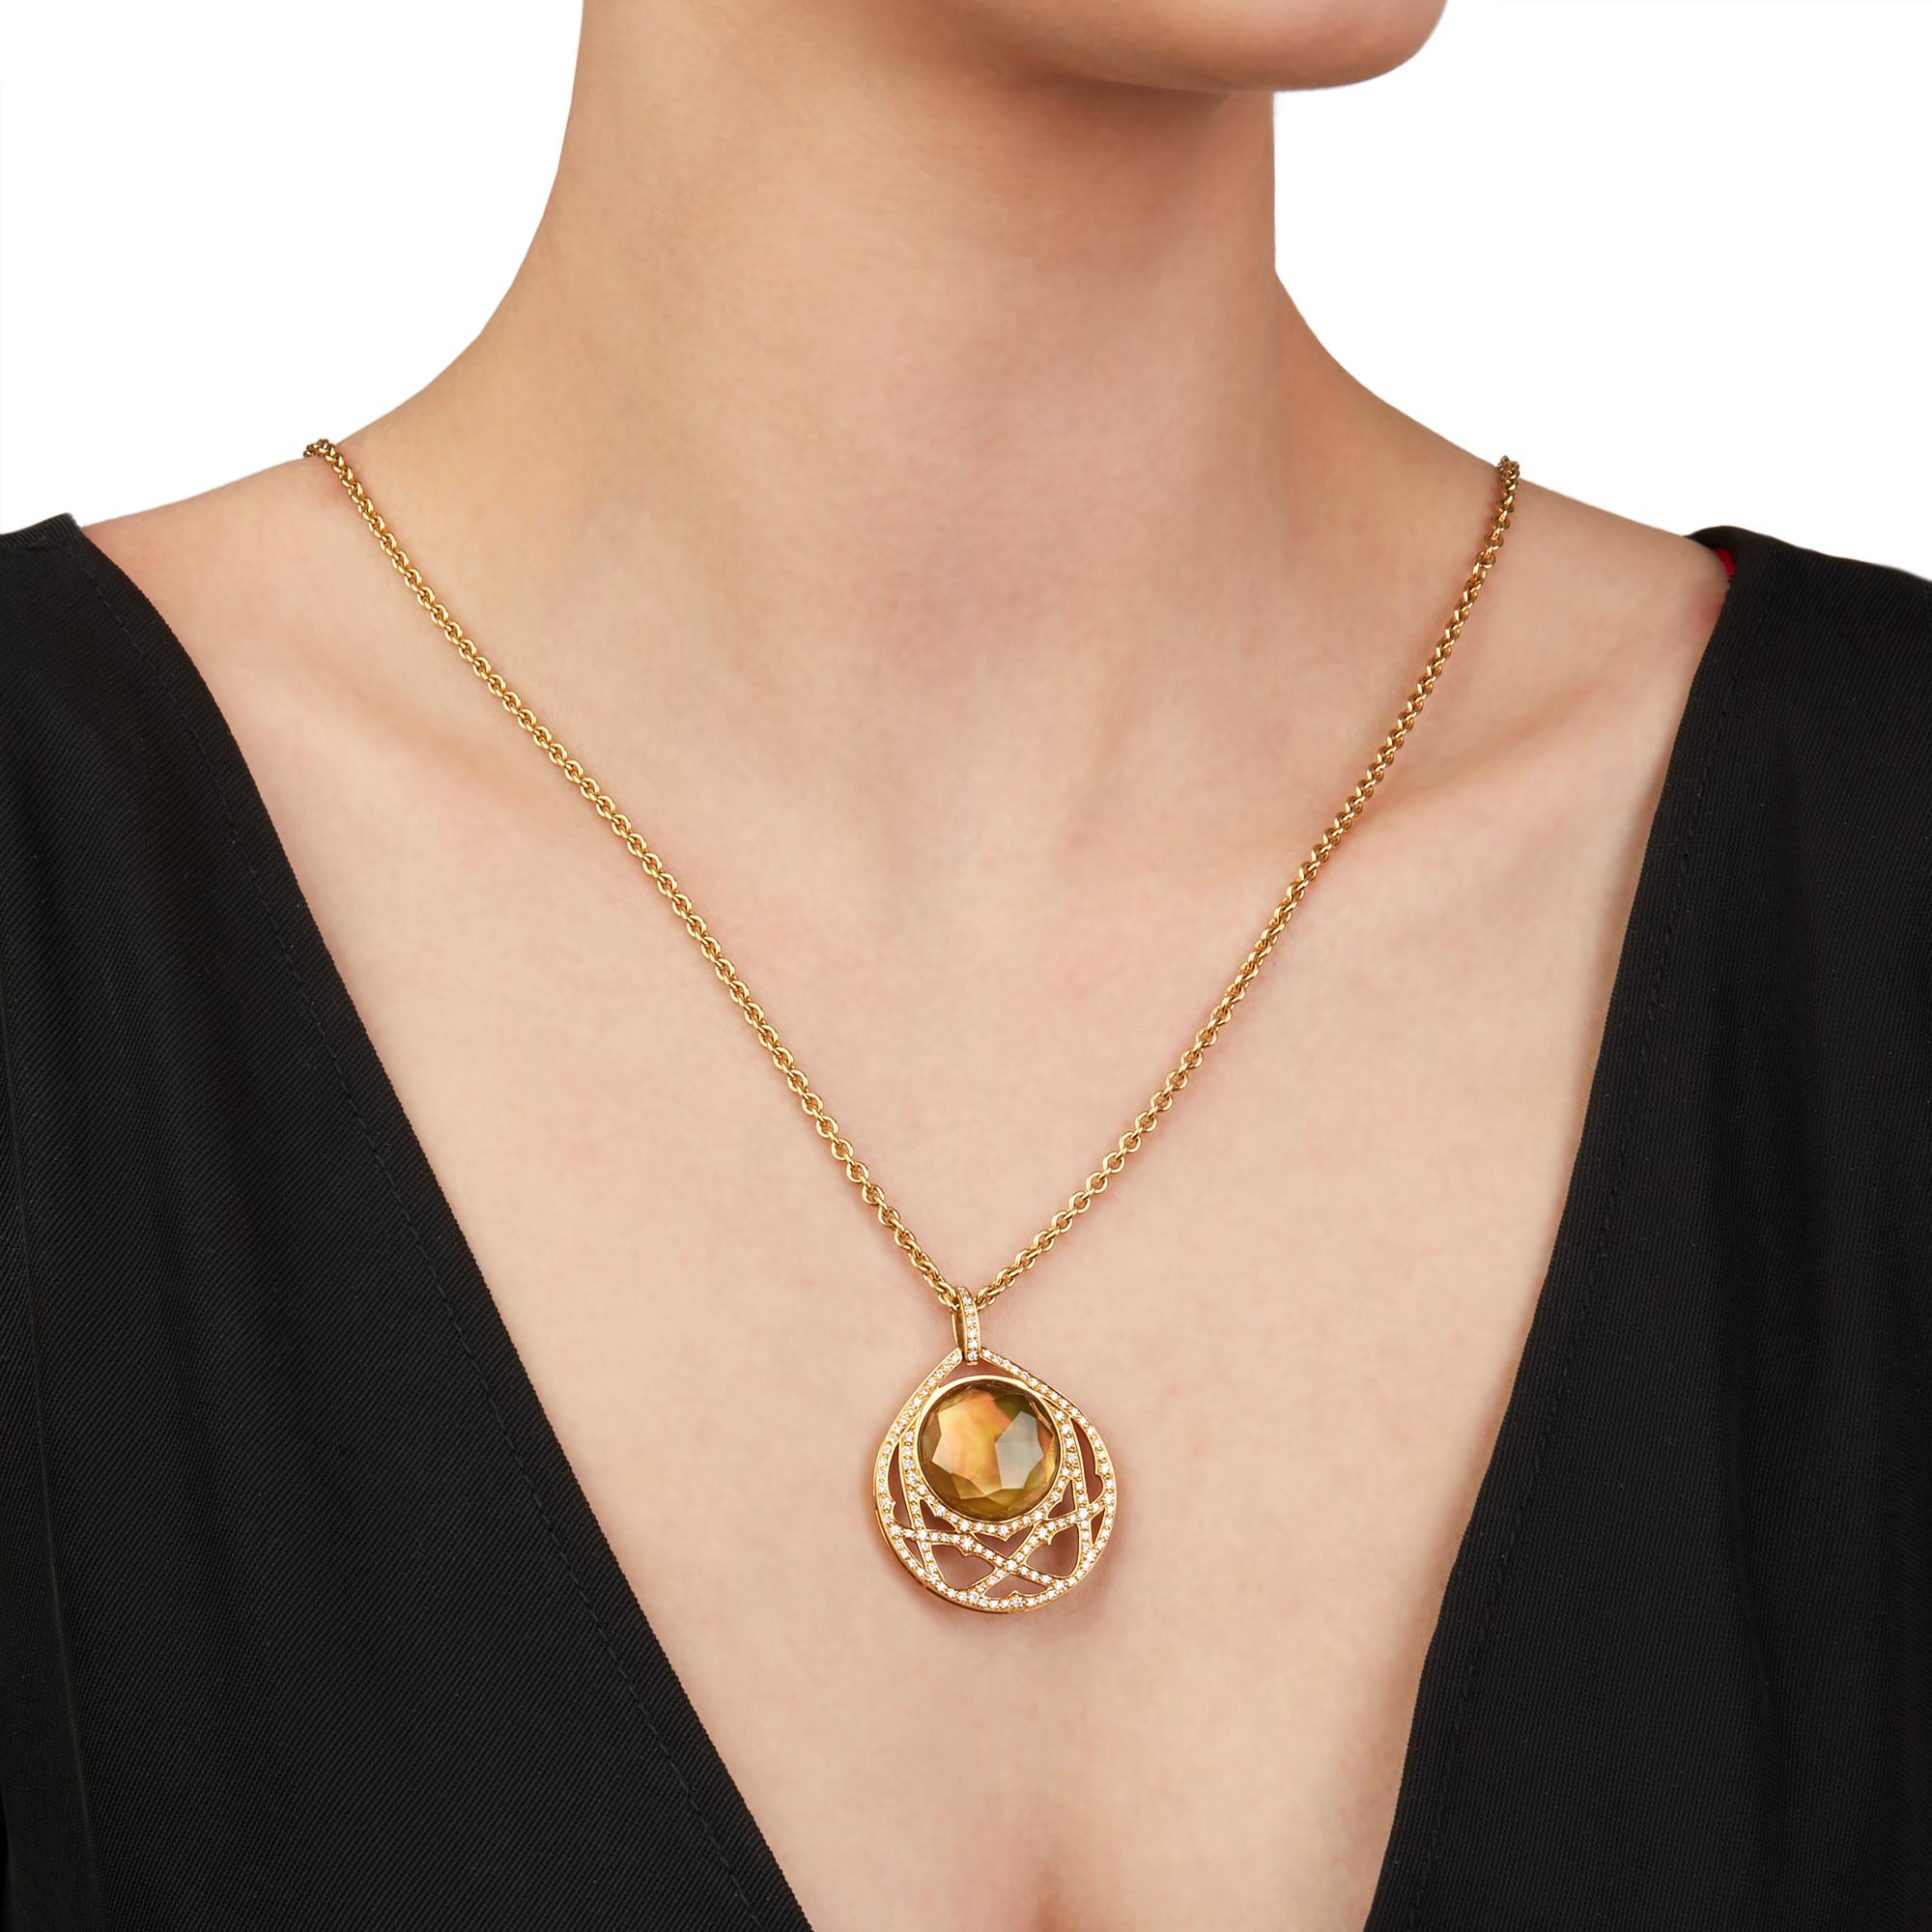 This Necklace by Stephen Webster is from their Crystal Haze collection and features a Citrine doublet with Mother of Pearl surrounded by round brilliant cut Diamonds, made in 18k Yellow Gold. This Necklace has a secure lobster clasp. Complete with